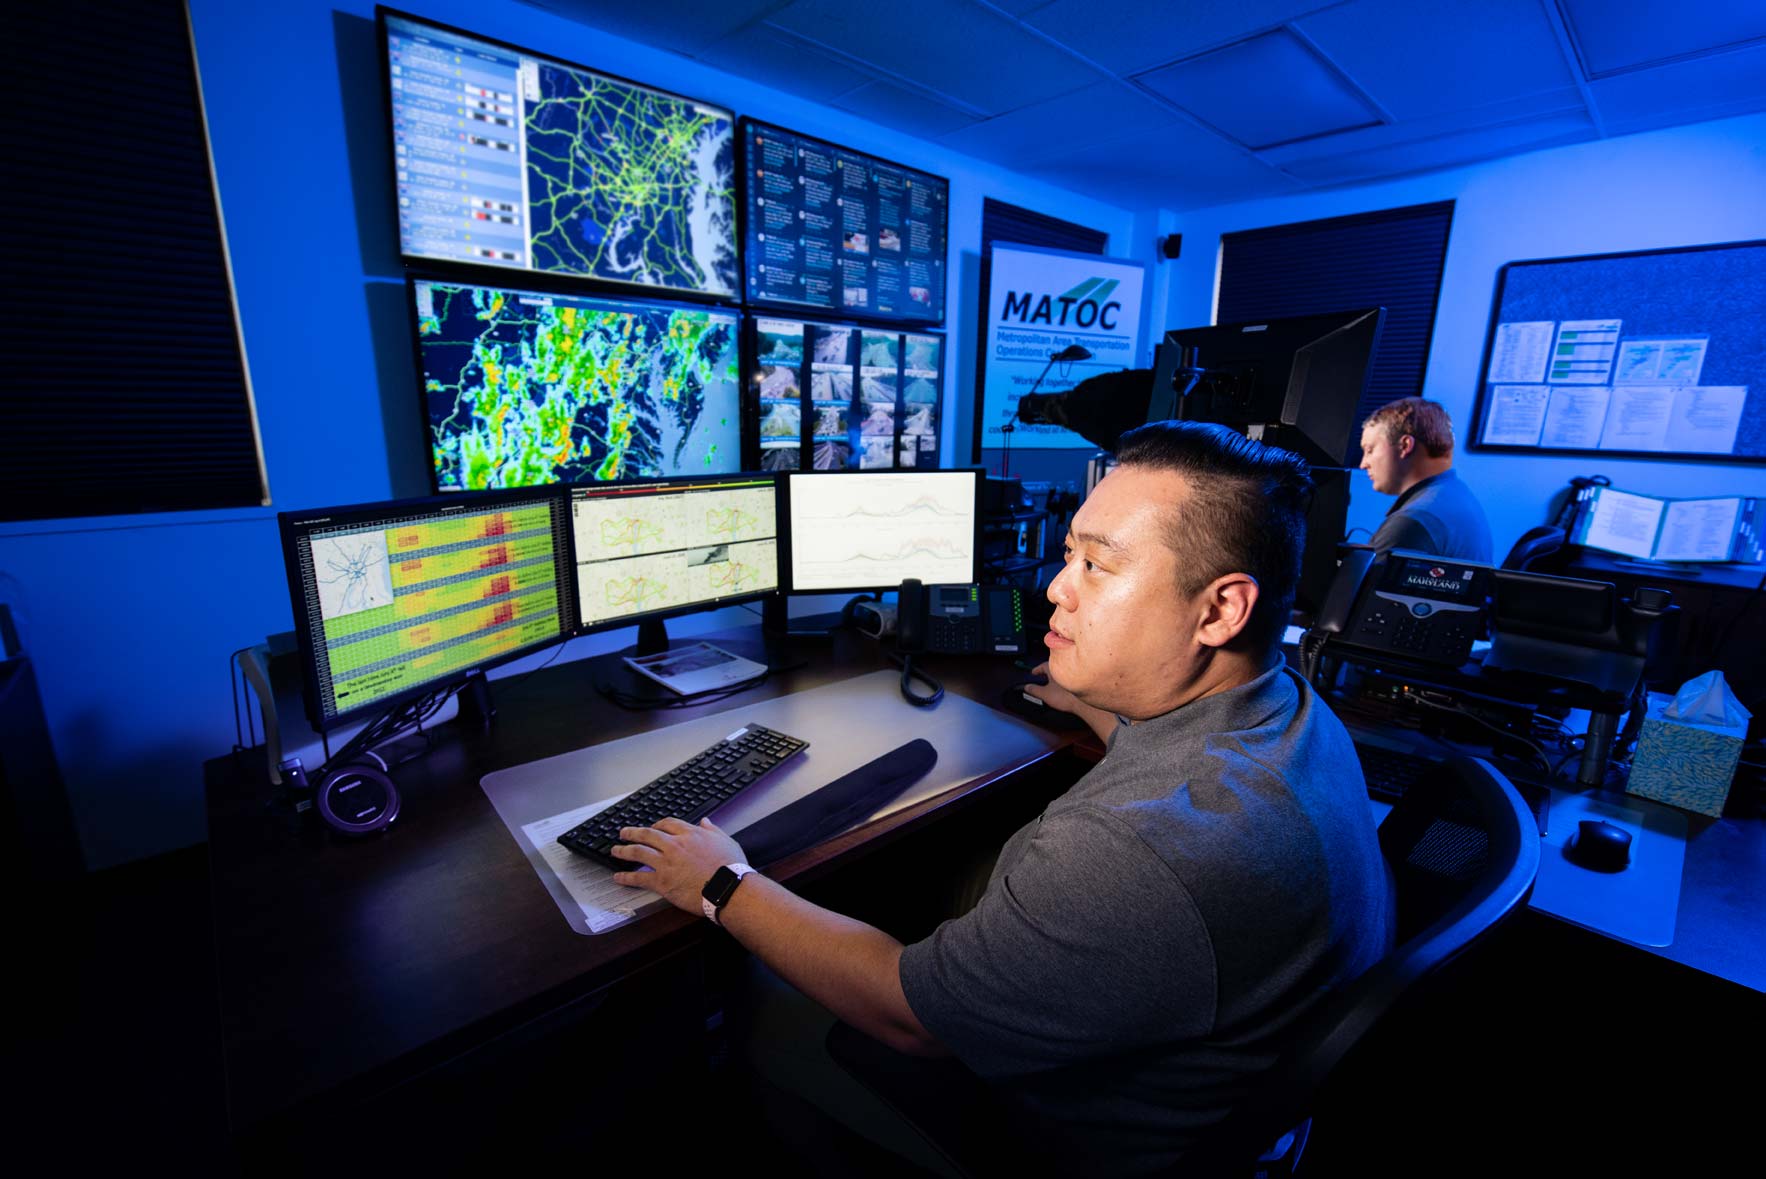 A man looks at computer screens in a blue room at the MATOC operations center